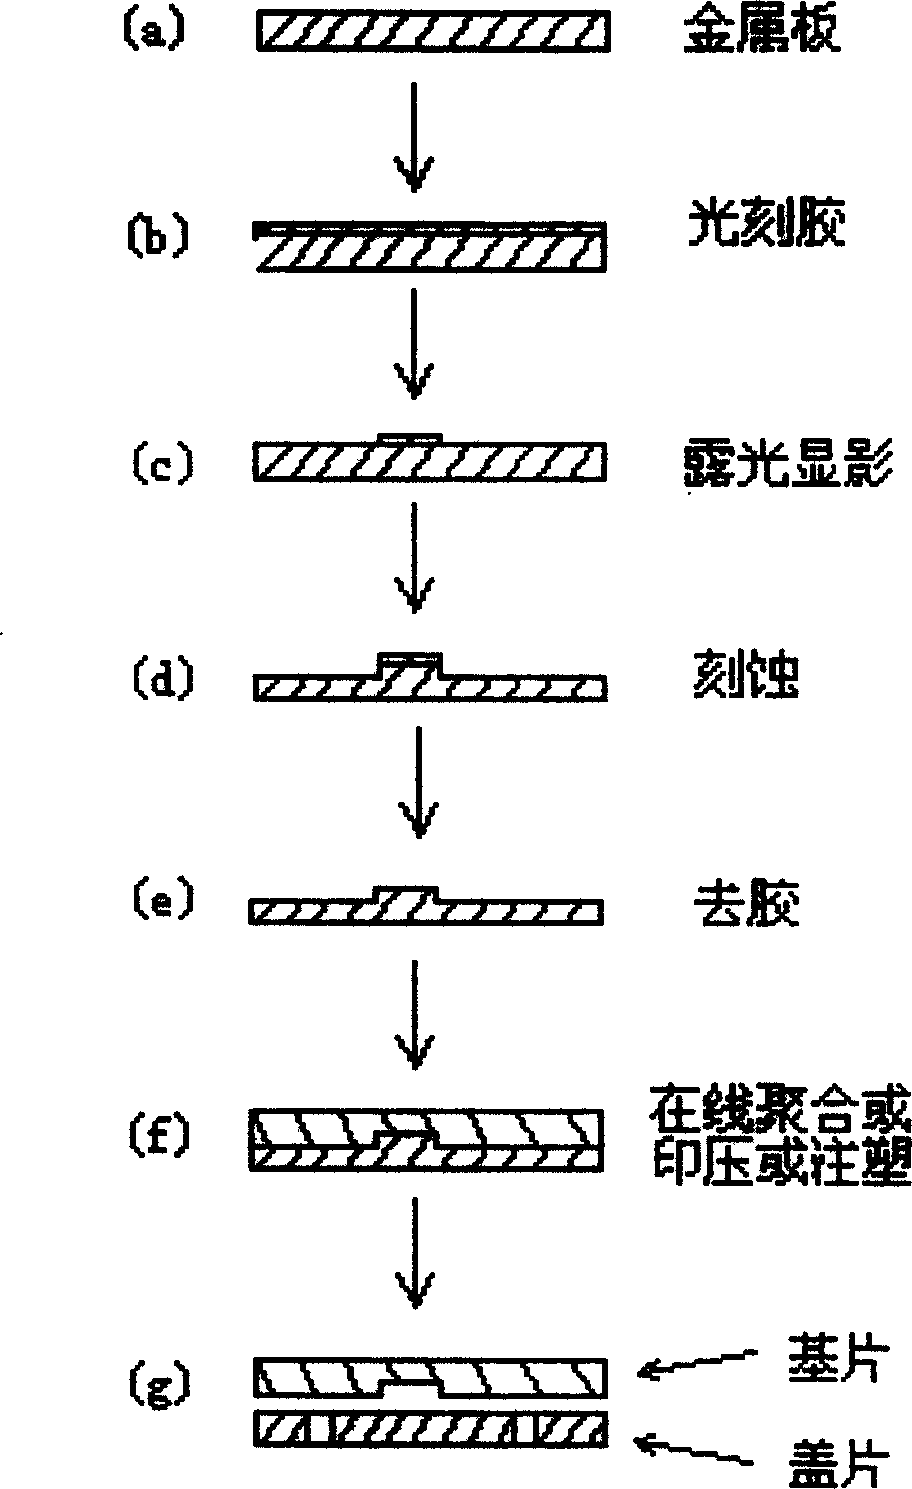 Process for preparing high polymer micro-flow control chips